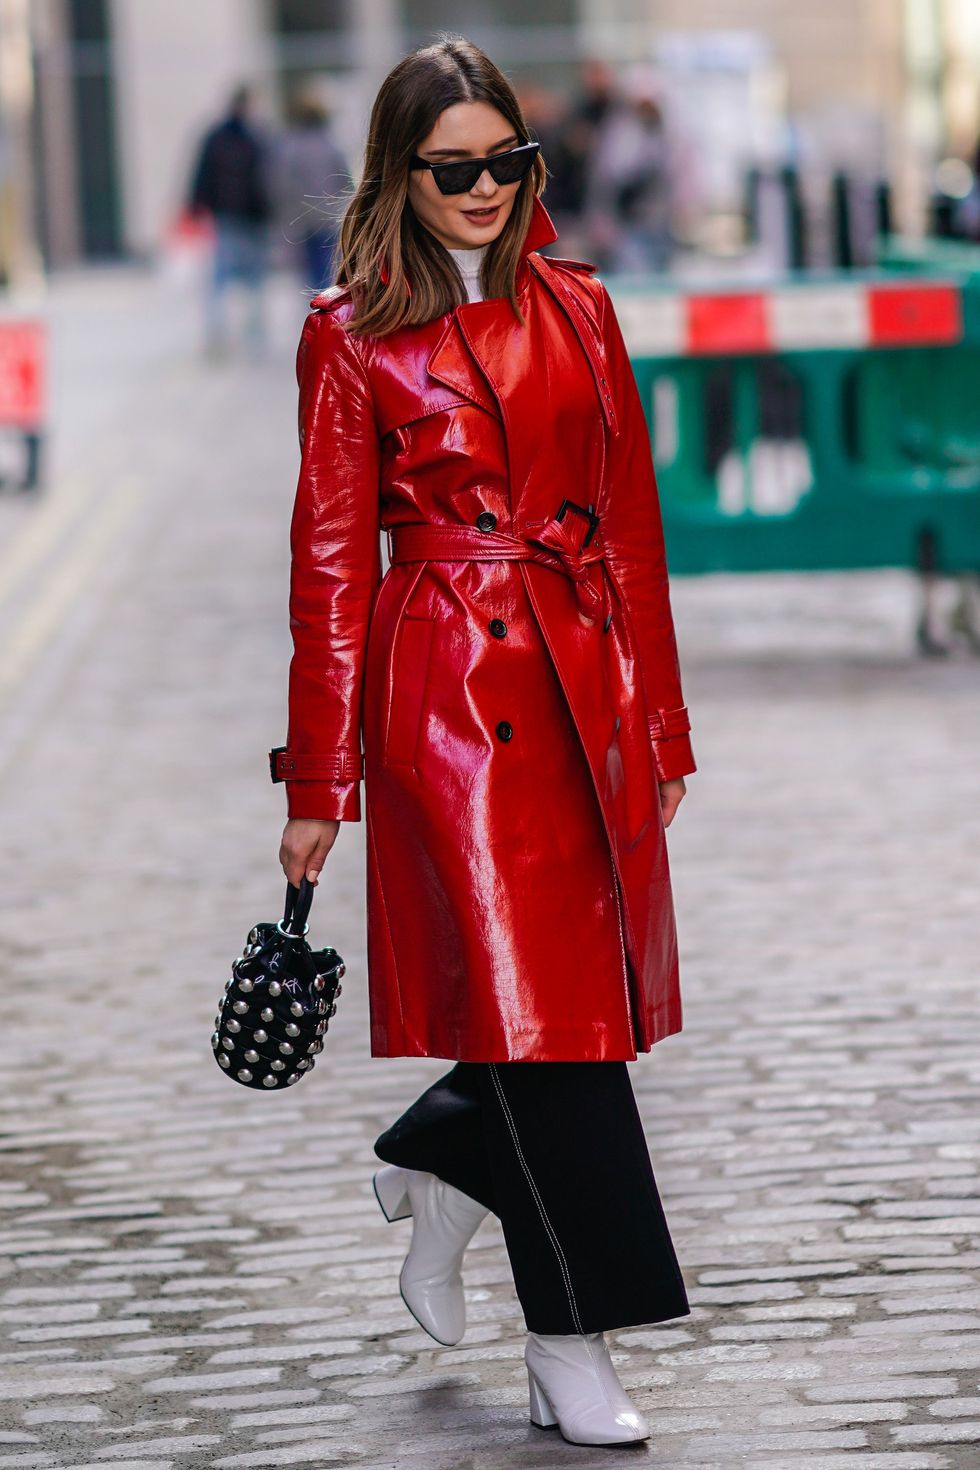 How to Style Trench Coats for Winter - OF LEATHER AND LACE